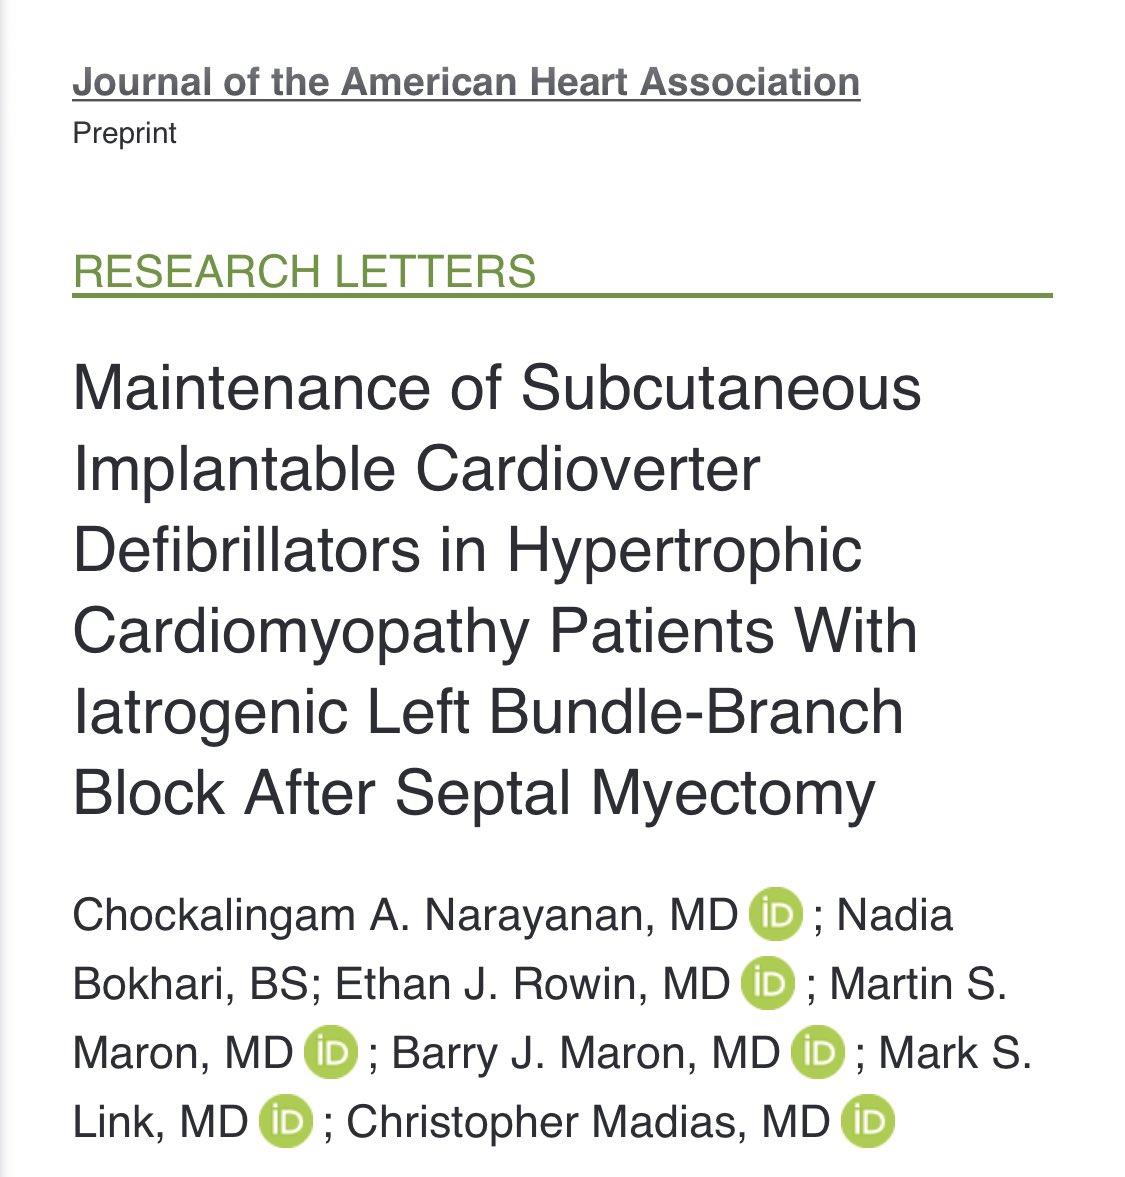 Our research letter in JAHA highlighting SICDs in HCM pts with LBBB after myectomy. 🔑: Maintaining SICDs post myectomy is likely feasible 🔑: Remote monitoring, vector assessment/adjustment are critical @TuftsMedicalCtr @utmbcardiology Link: ahajournals.org/doi/10.1161/JA…